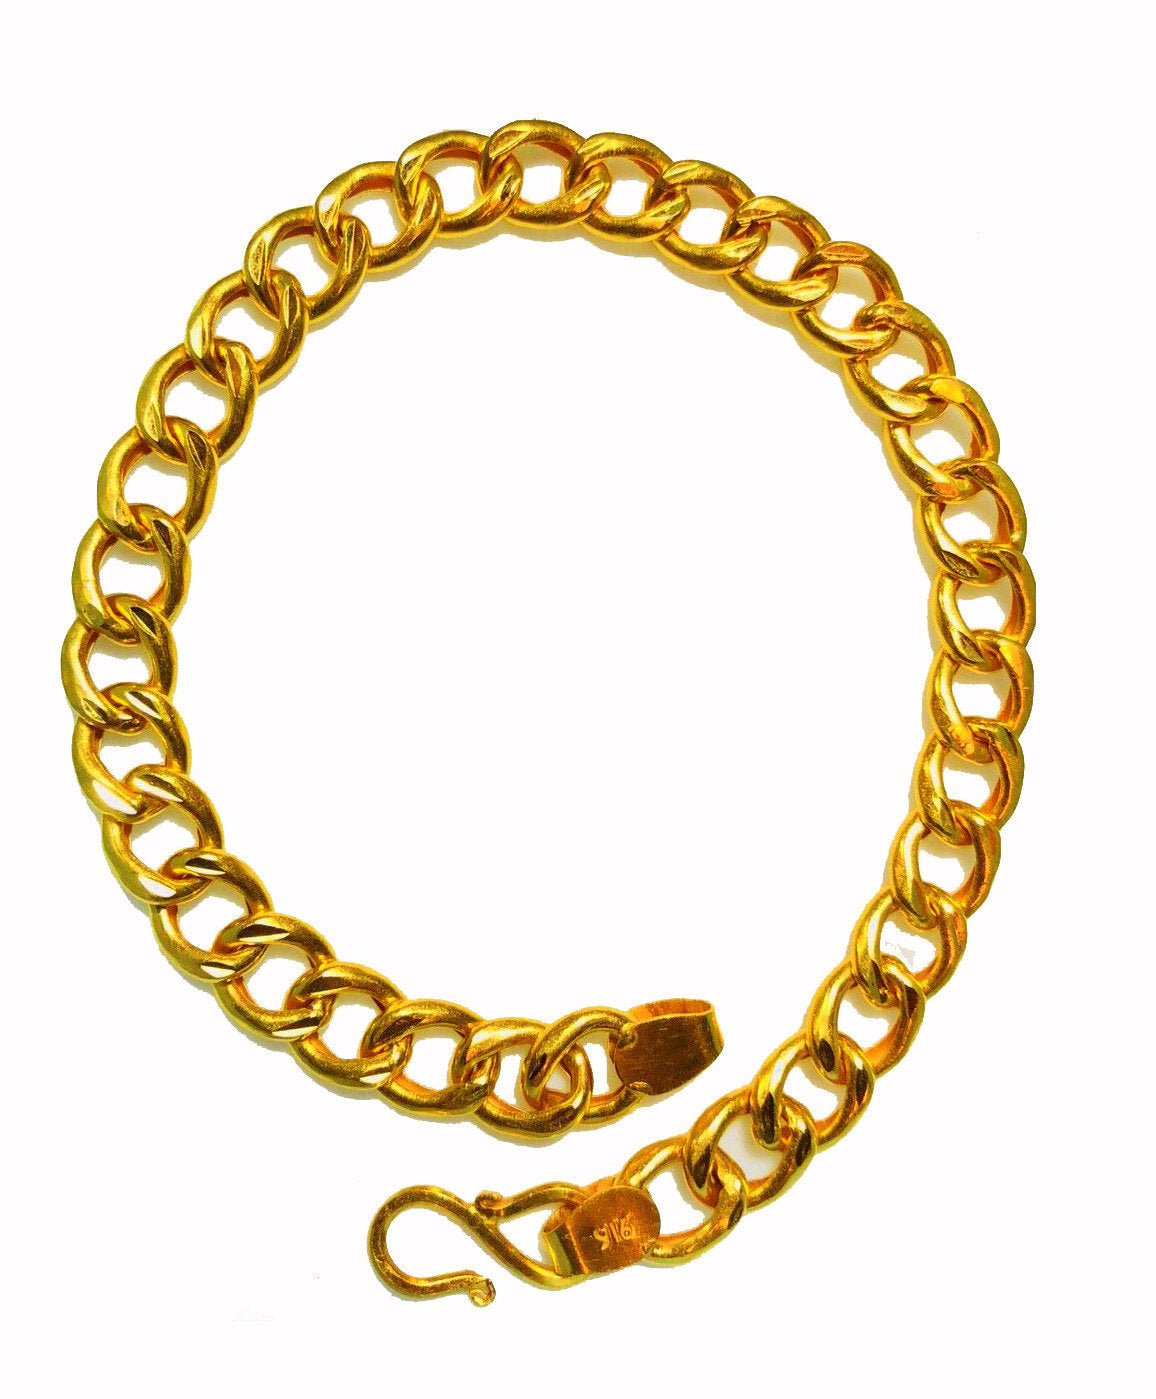 Genuine 22k yellow gold handmade fabulous link chain bracelet unisex jewelry from Rajasthan india - TRIBAL ORNAMENTS